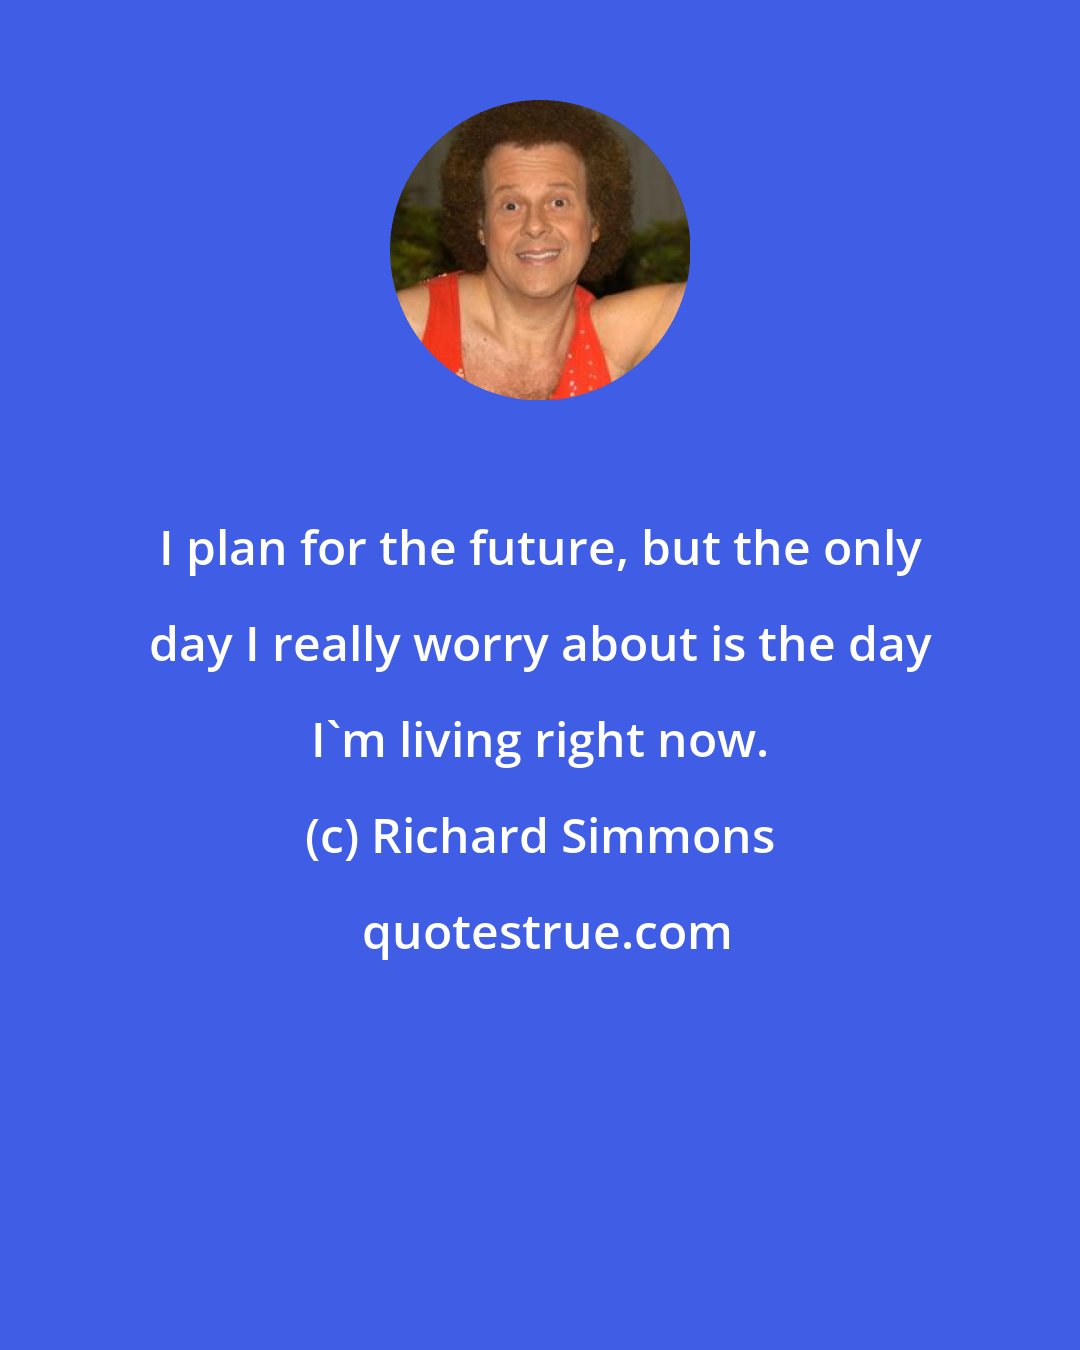 Richard Simmons: I plan for the future, but the only day I really worry about is the day I'm living right now.